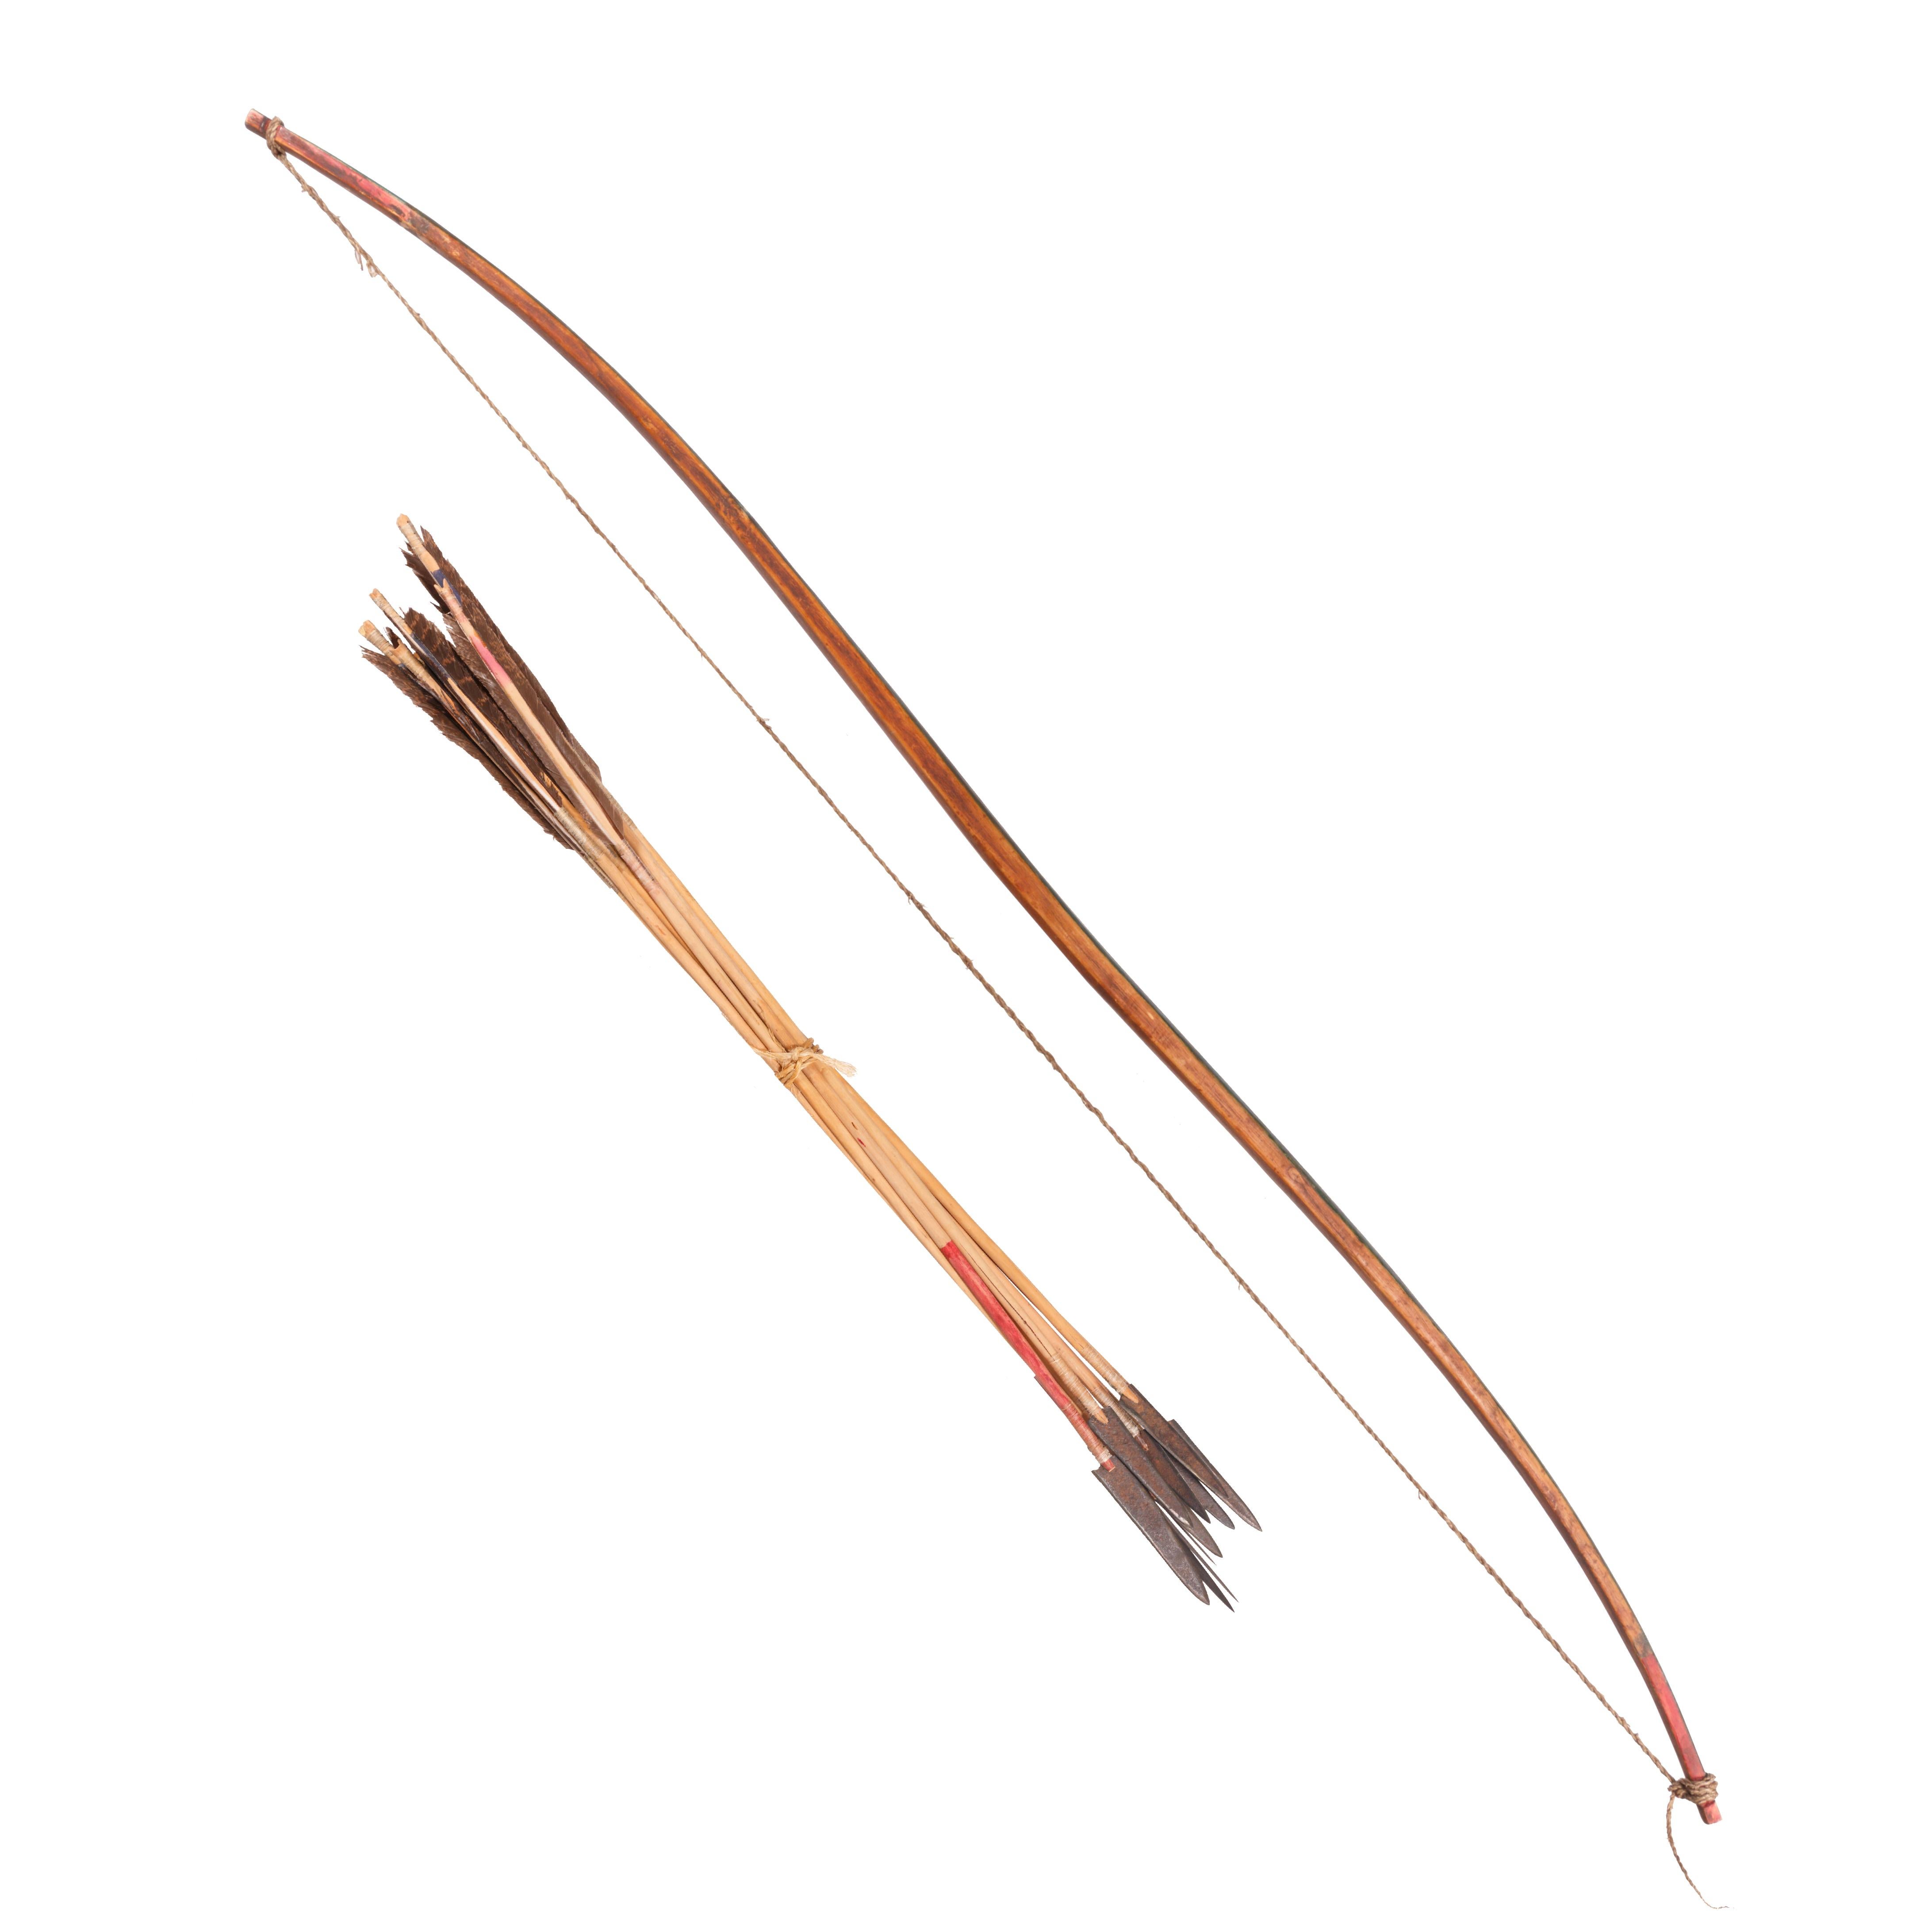 Archery Brand OMA Bow and Arrow Set Native American Indian Southwest Decor 